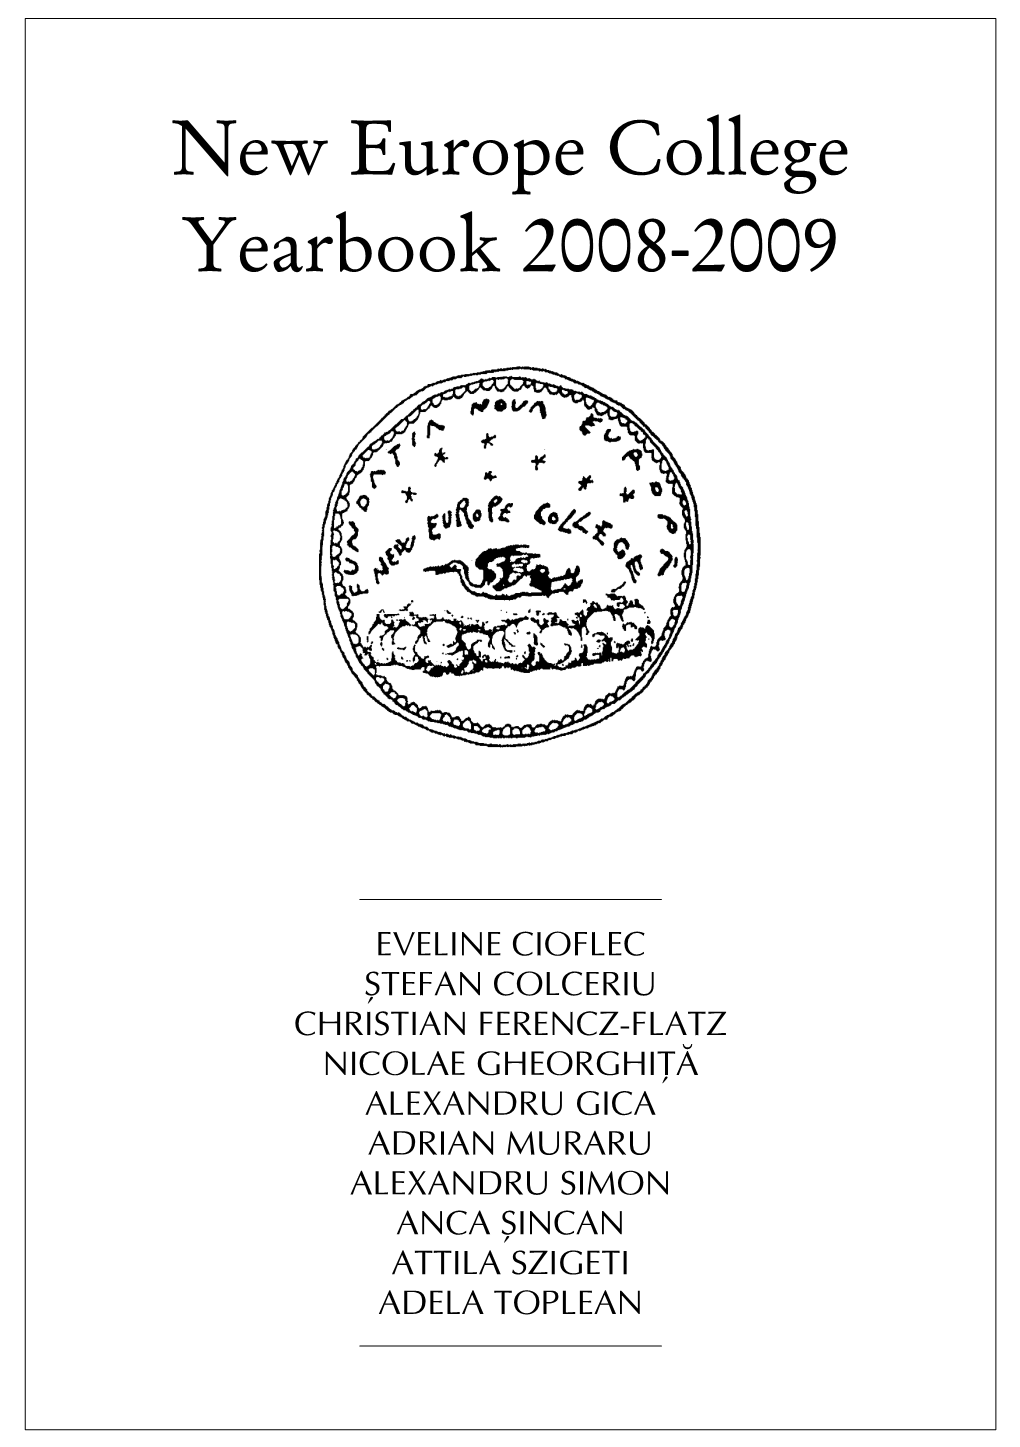 New Europe College Yearbook 2008-2009